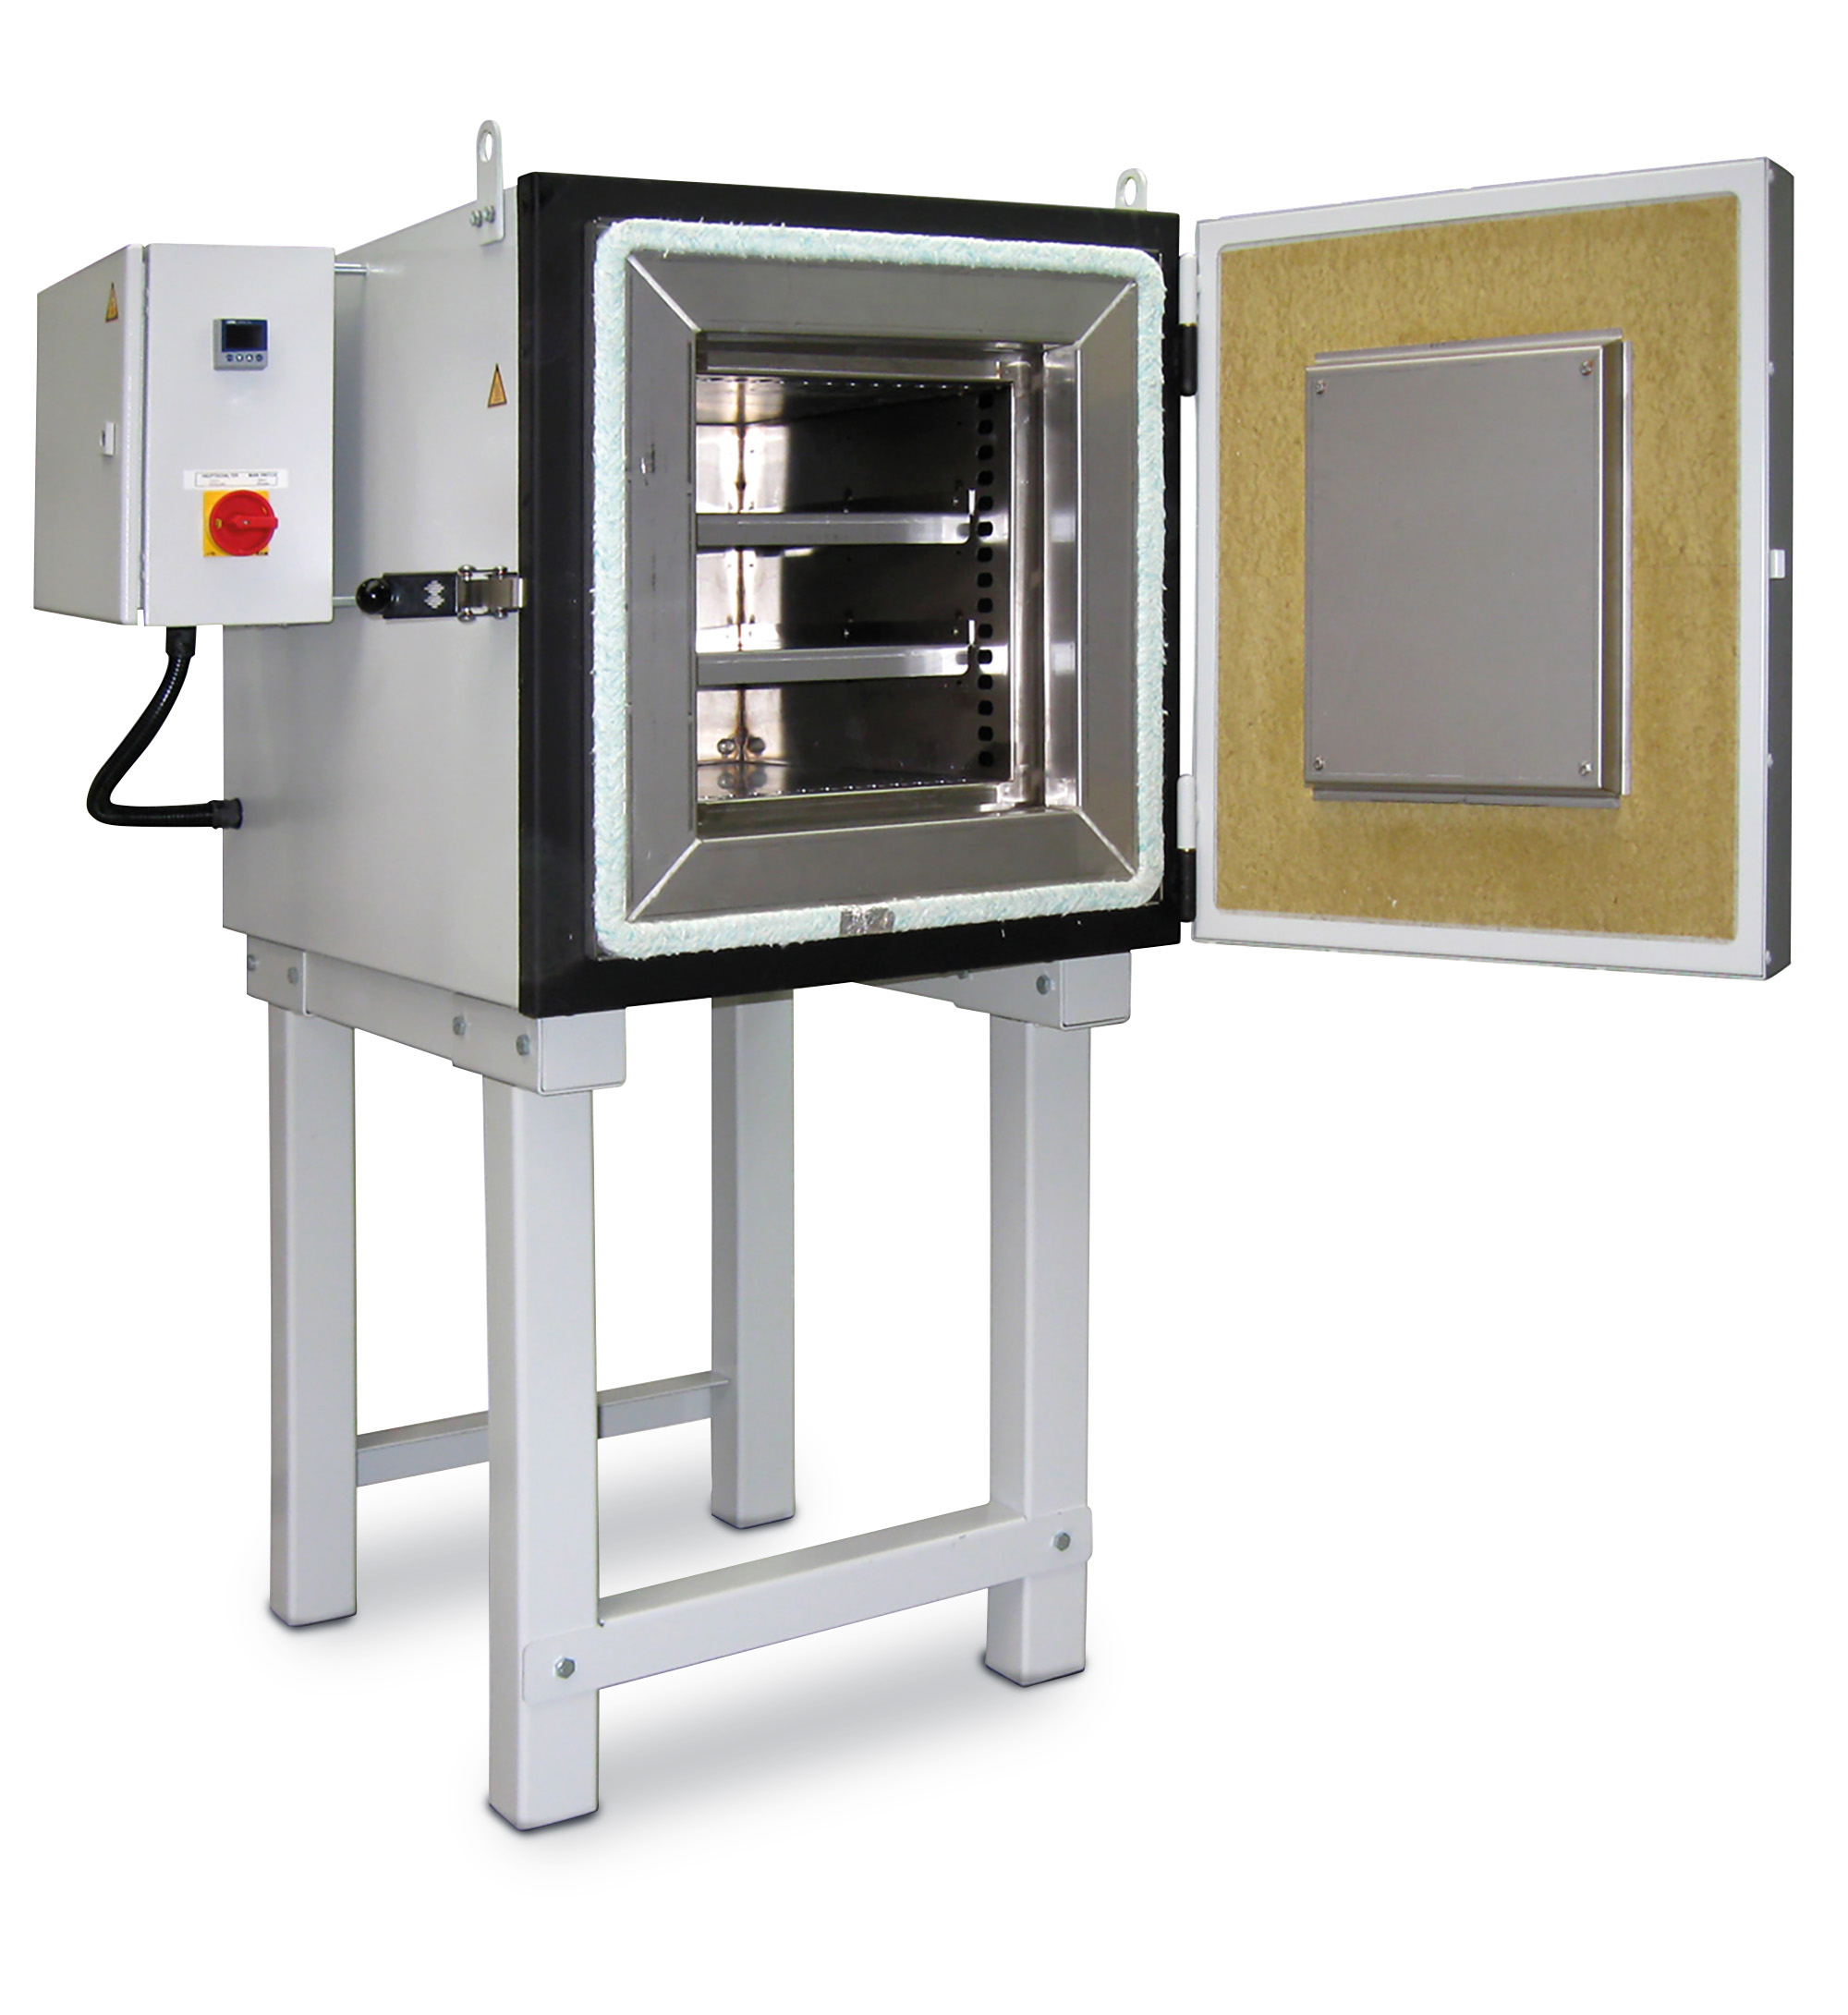 Air circulation chamber furnaces up to 1000l